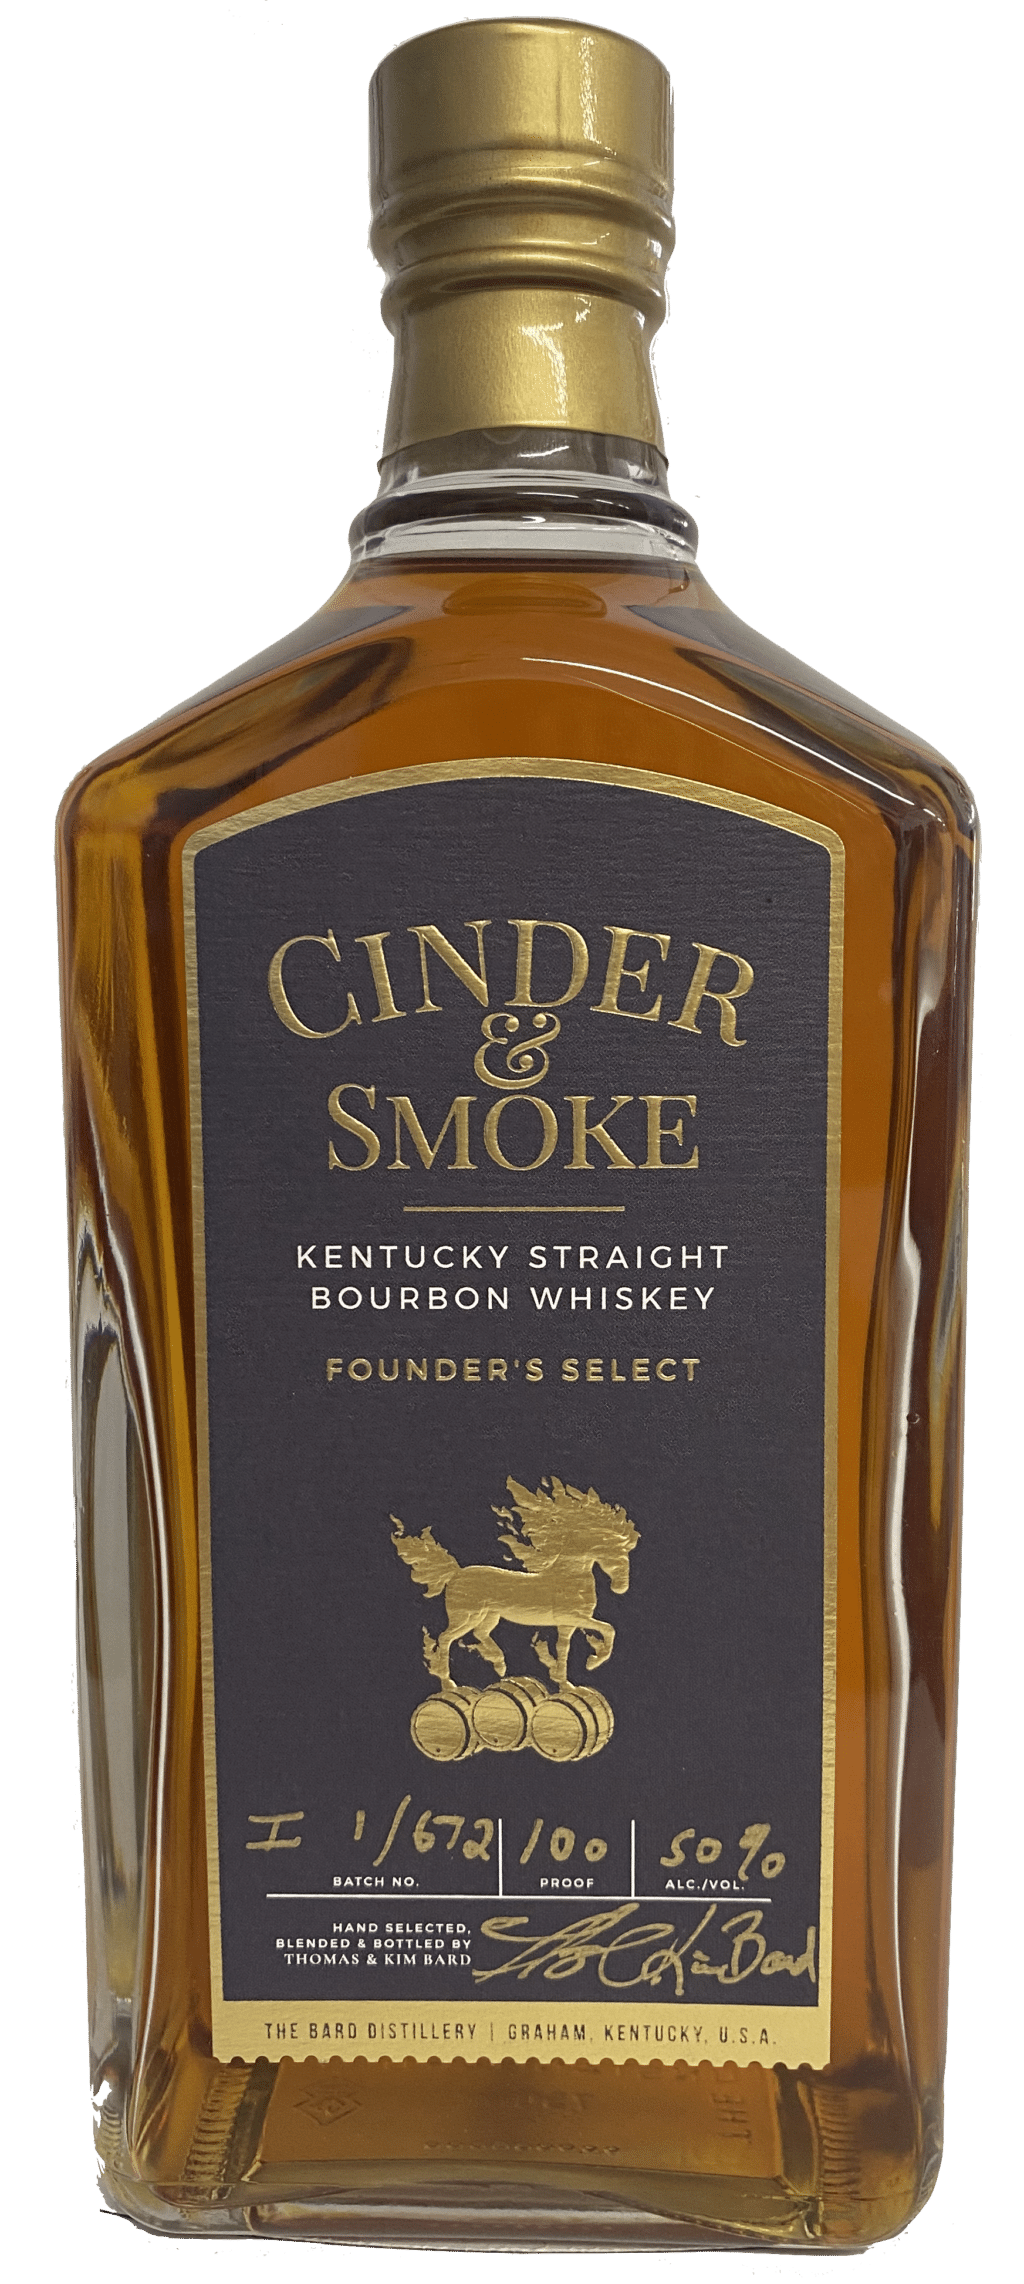 The Bard Distillery - Cinder & Smoke Founder's Select